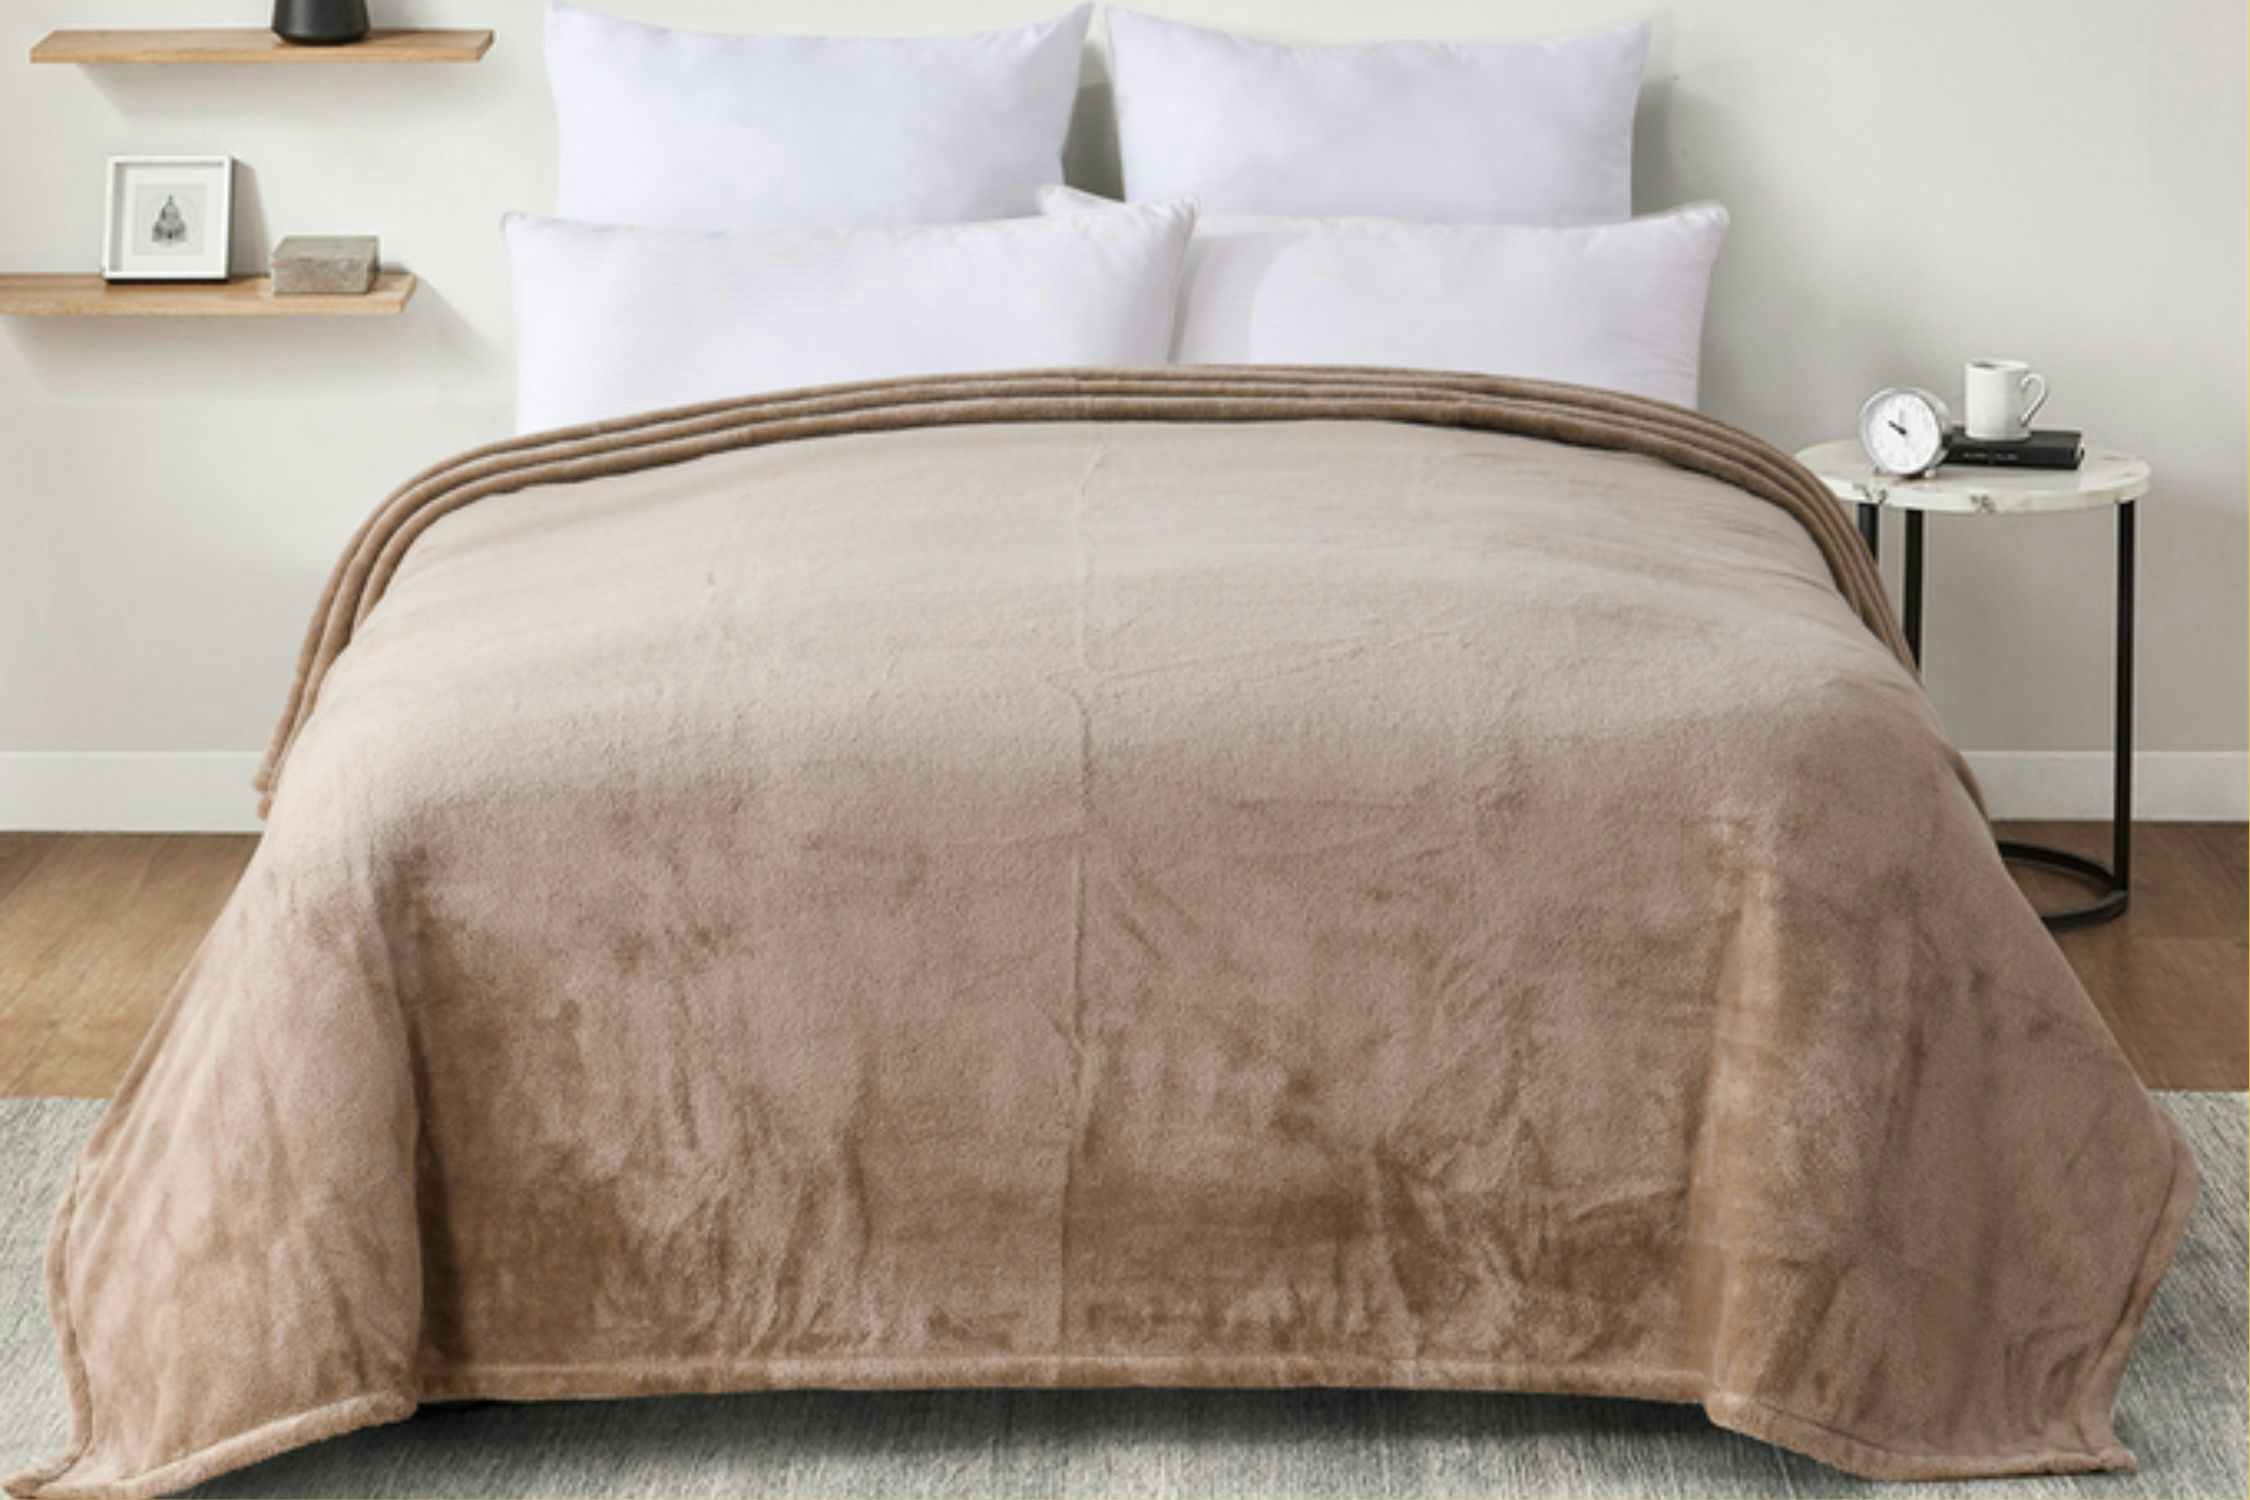 Mainstays Plush King Bed Blankets, as Low as $16 at Walmart